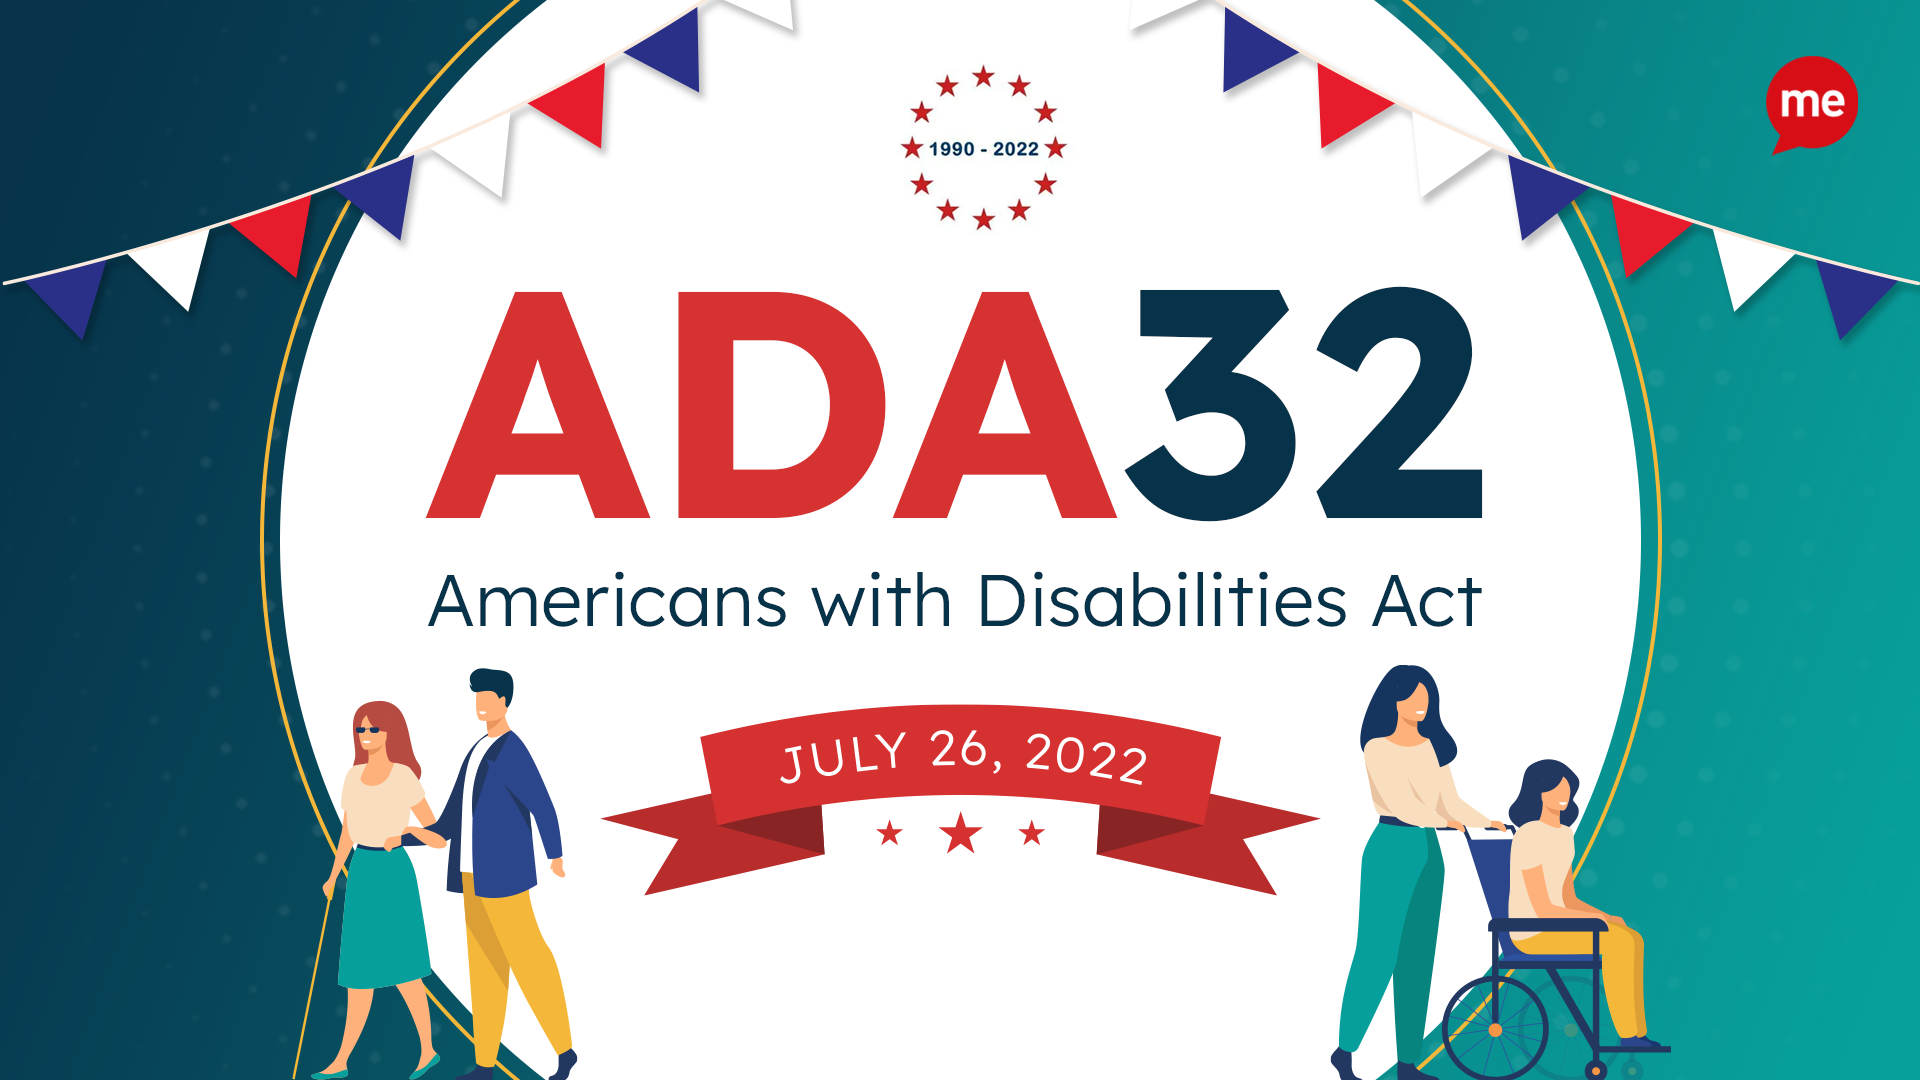 Americans with Disability Act